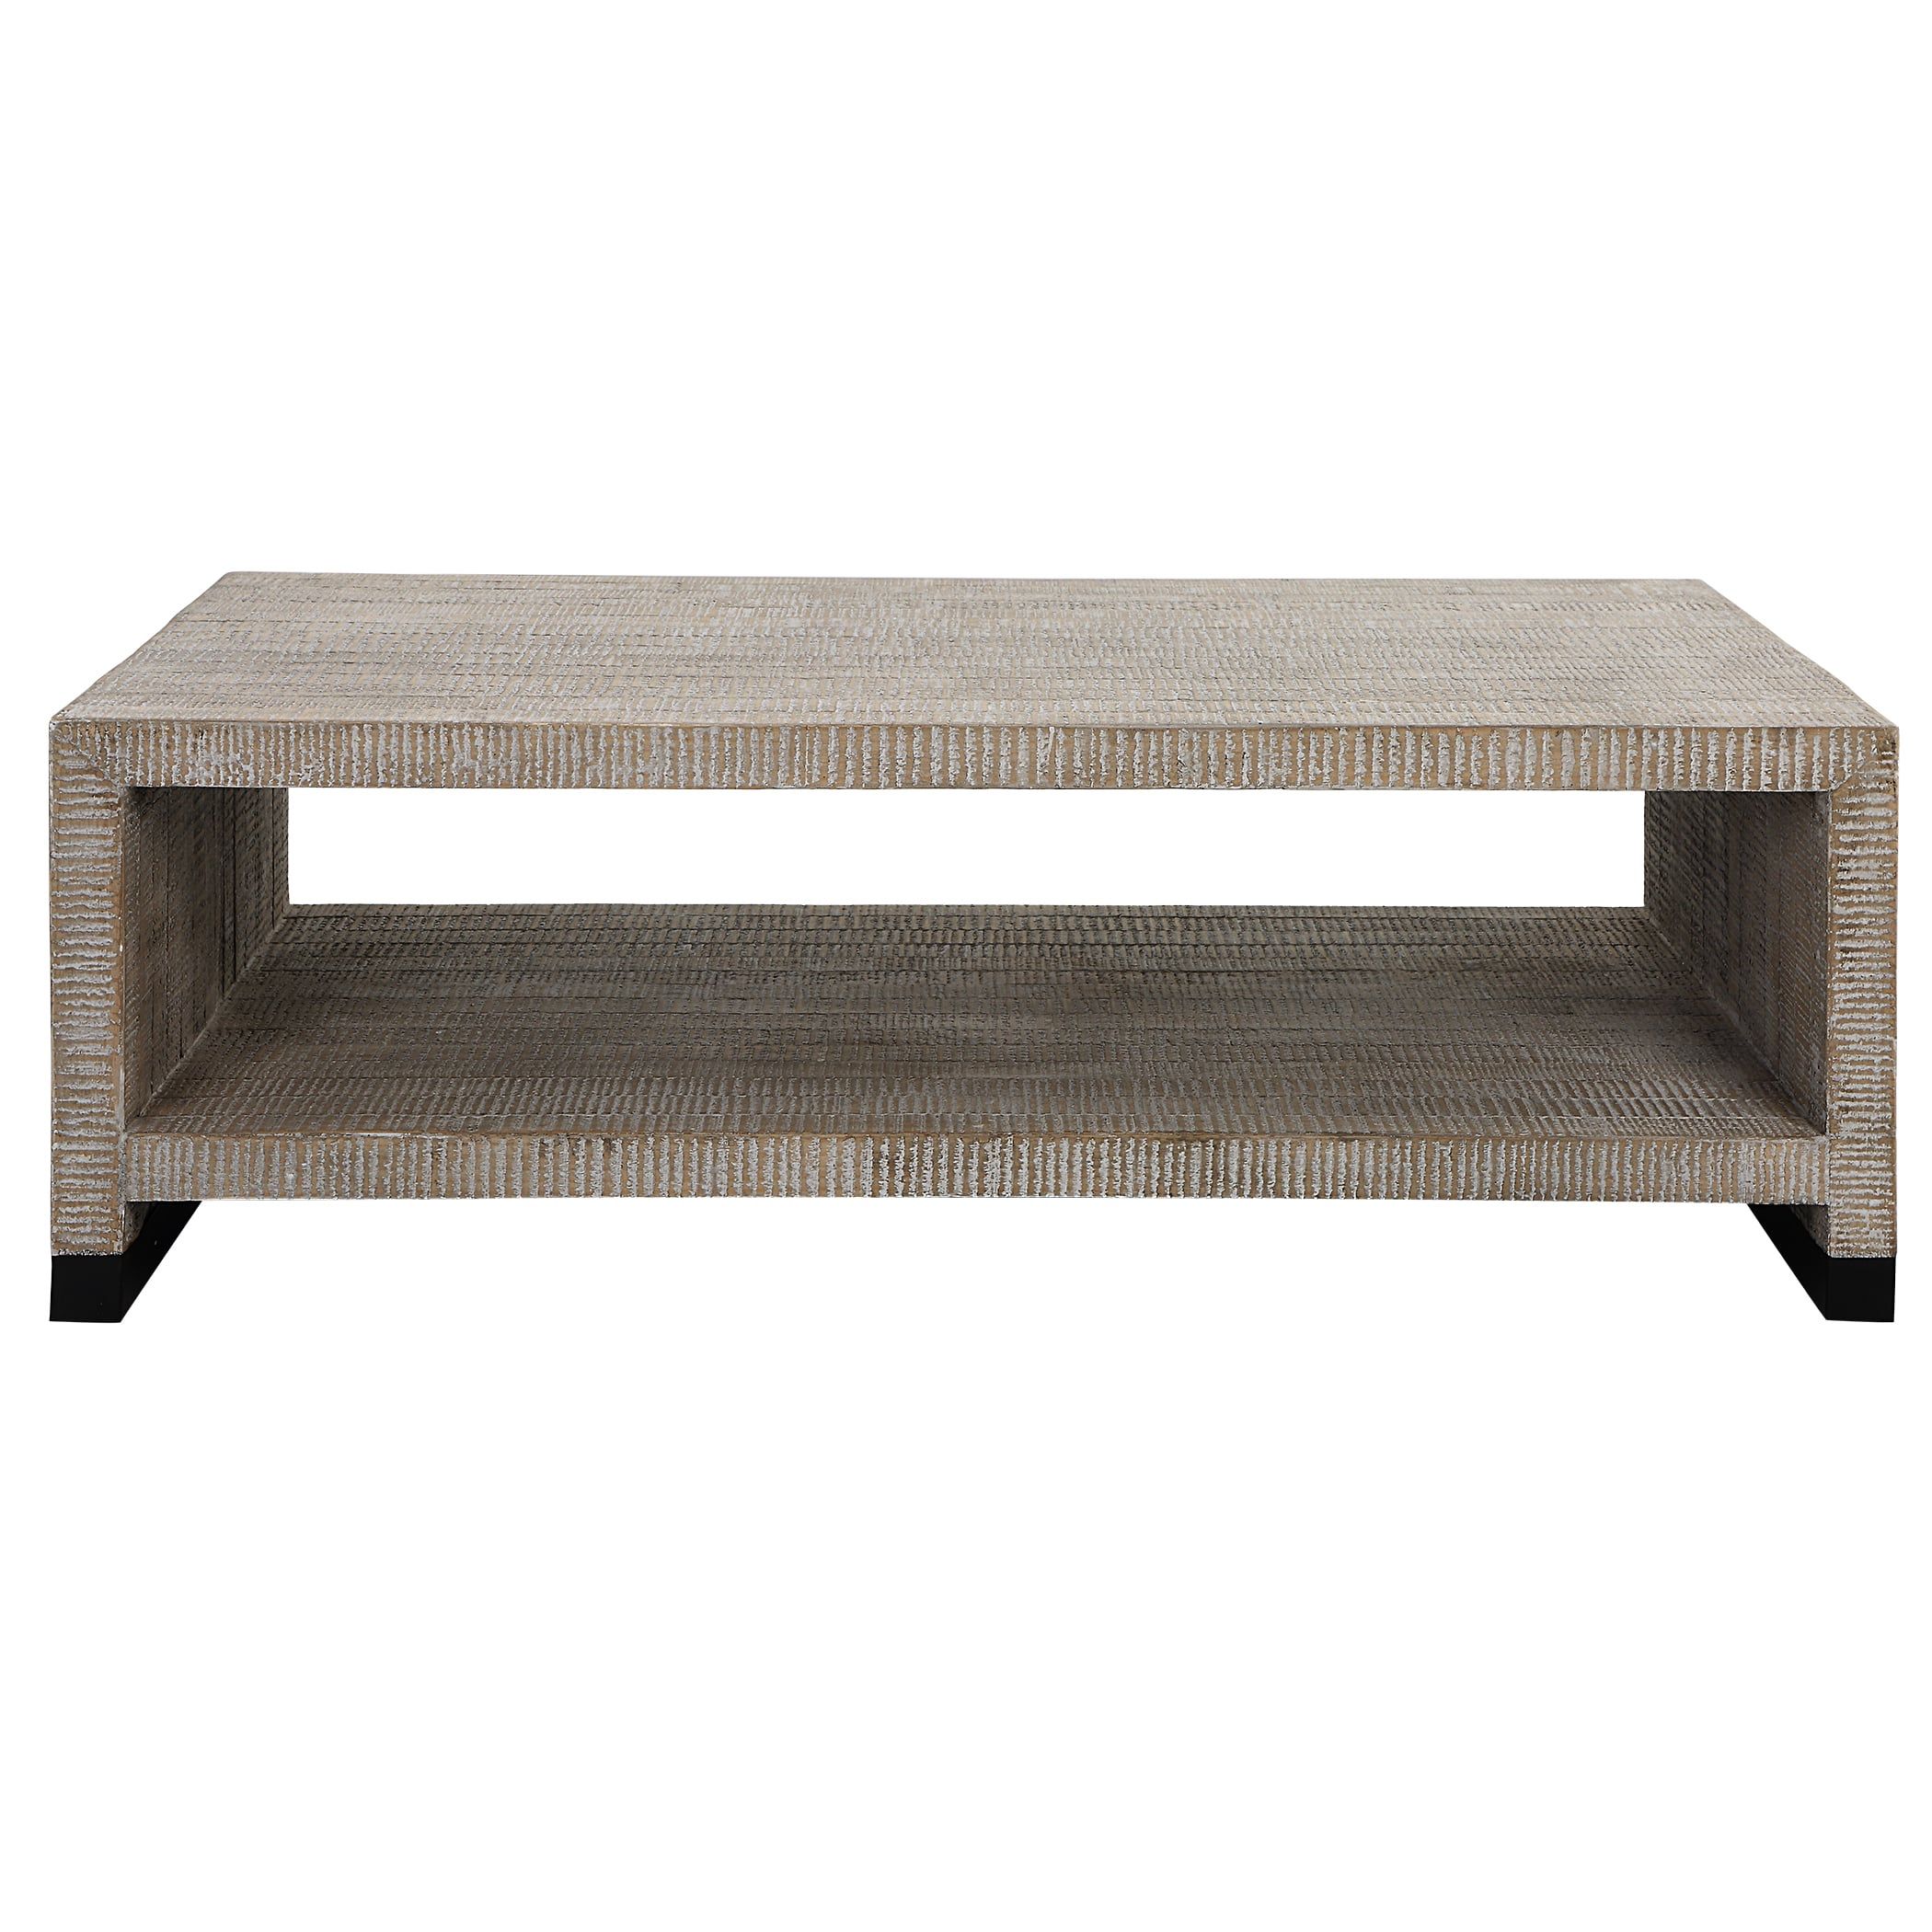 Uttermost Bosk Rustic White Washed Coffee Table With Open Shelving Throughout Coffee Tables With Open Storage Shelves (View 12 of 15)